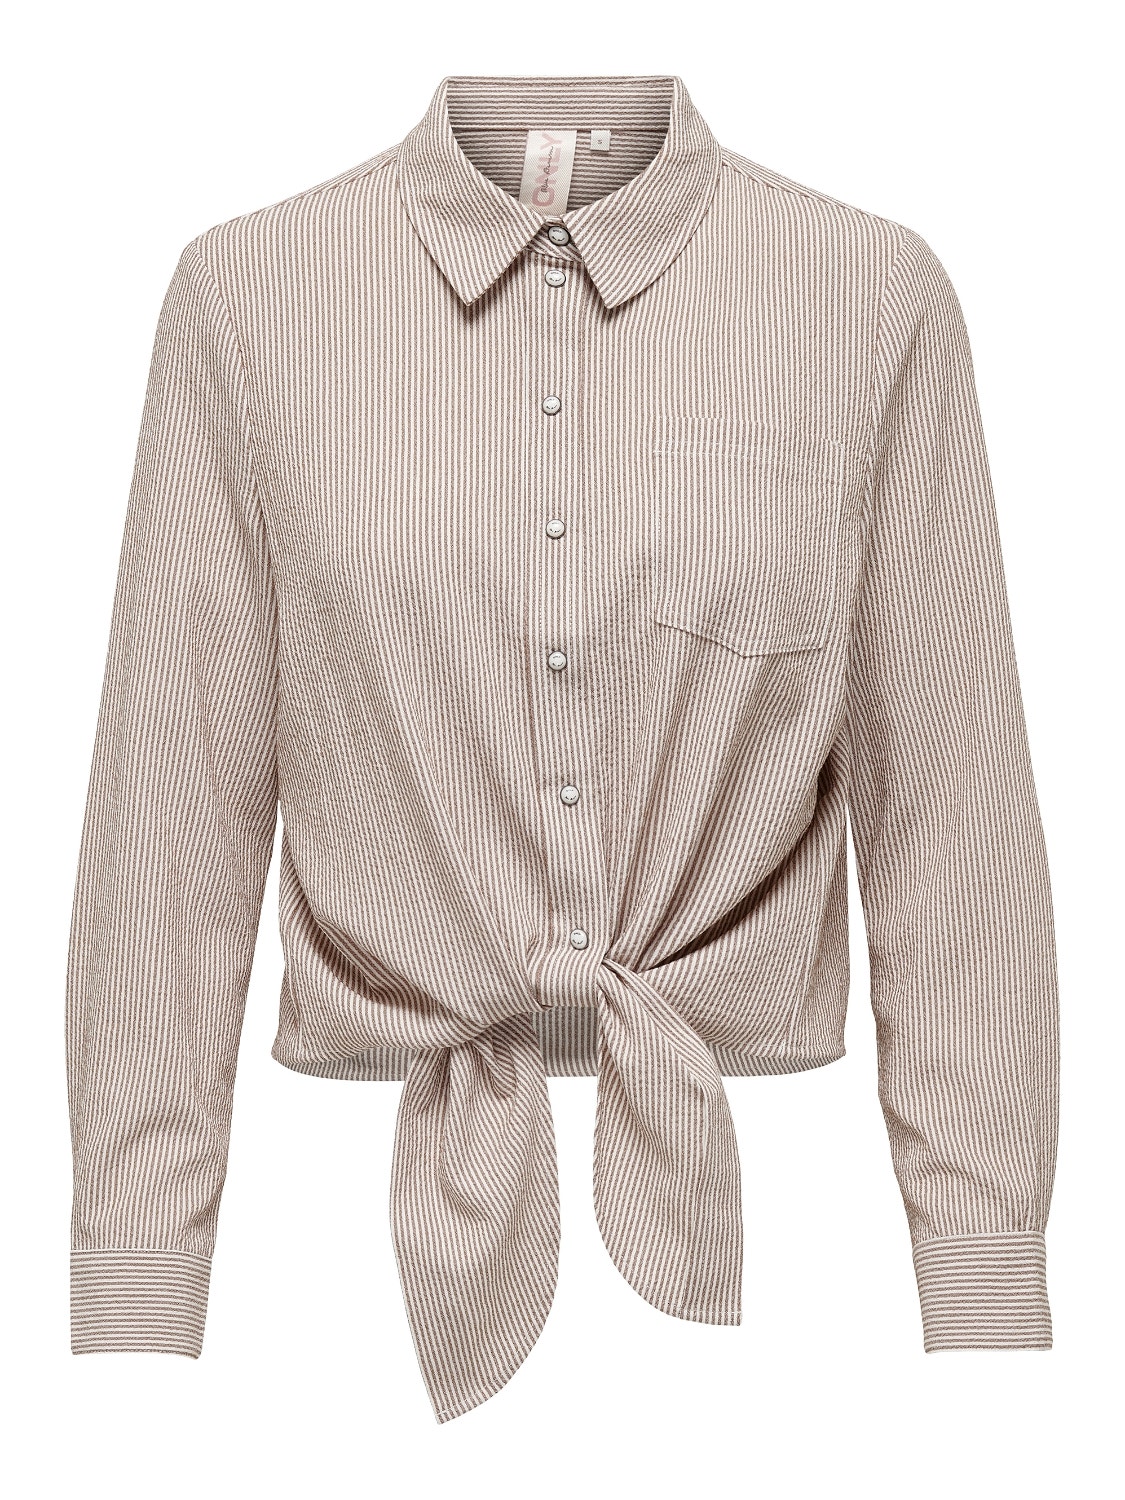 ONLY Regular Fit Shirt collar Shirt -Toasted Coconut - 15195910